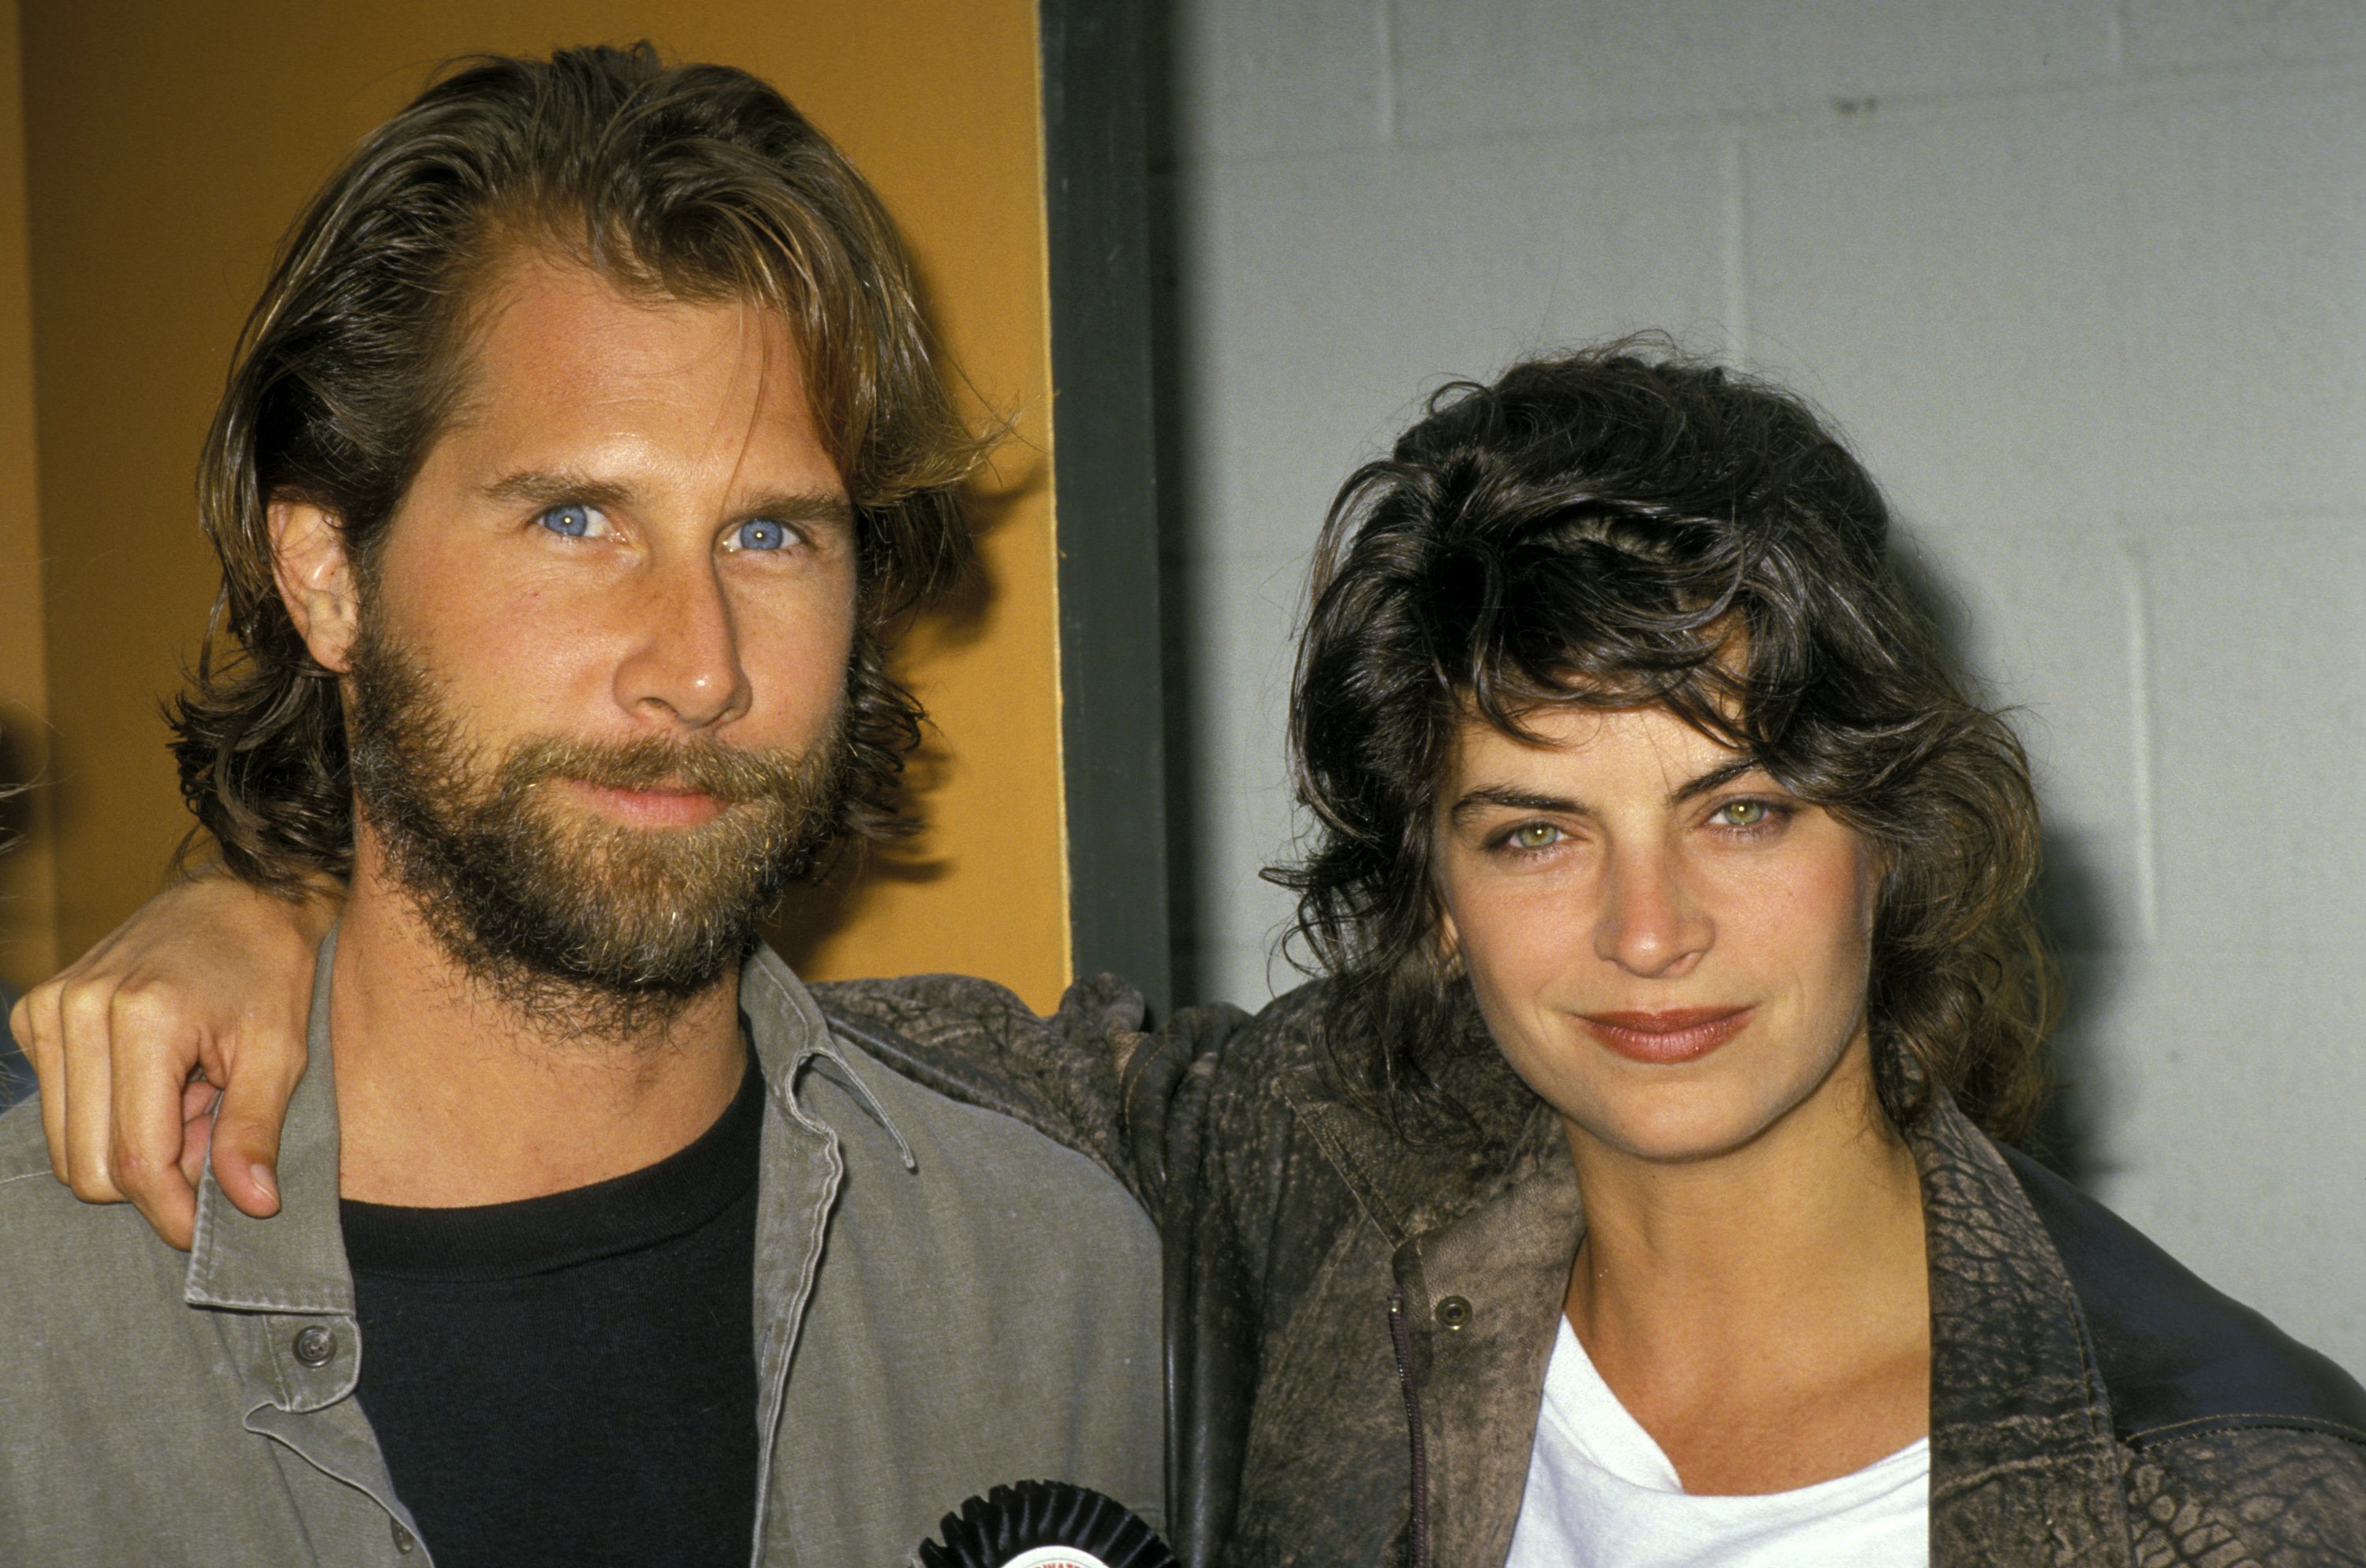 Parker Stevenson And Kirstie Alley at The Great Coldwater Canyon Chili Cook-Off for the Benefit of St. Michael's School of Los Angeles, circa 1988 | Source: Getty Images